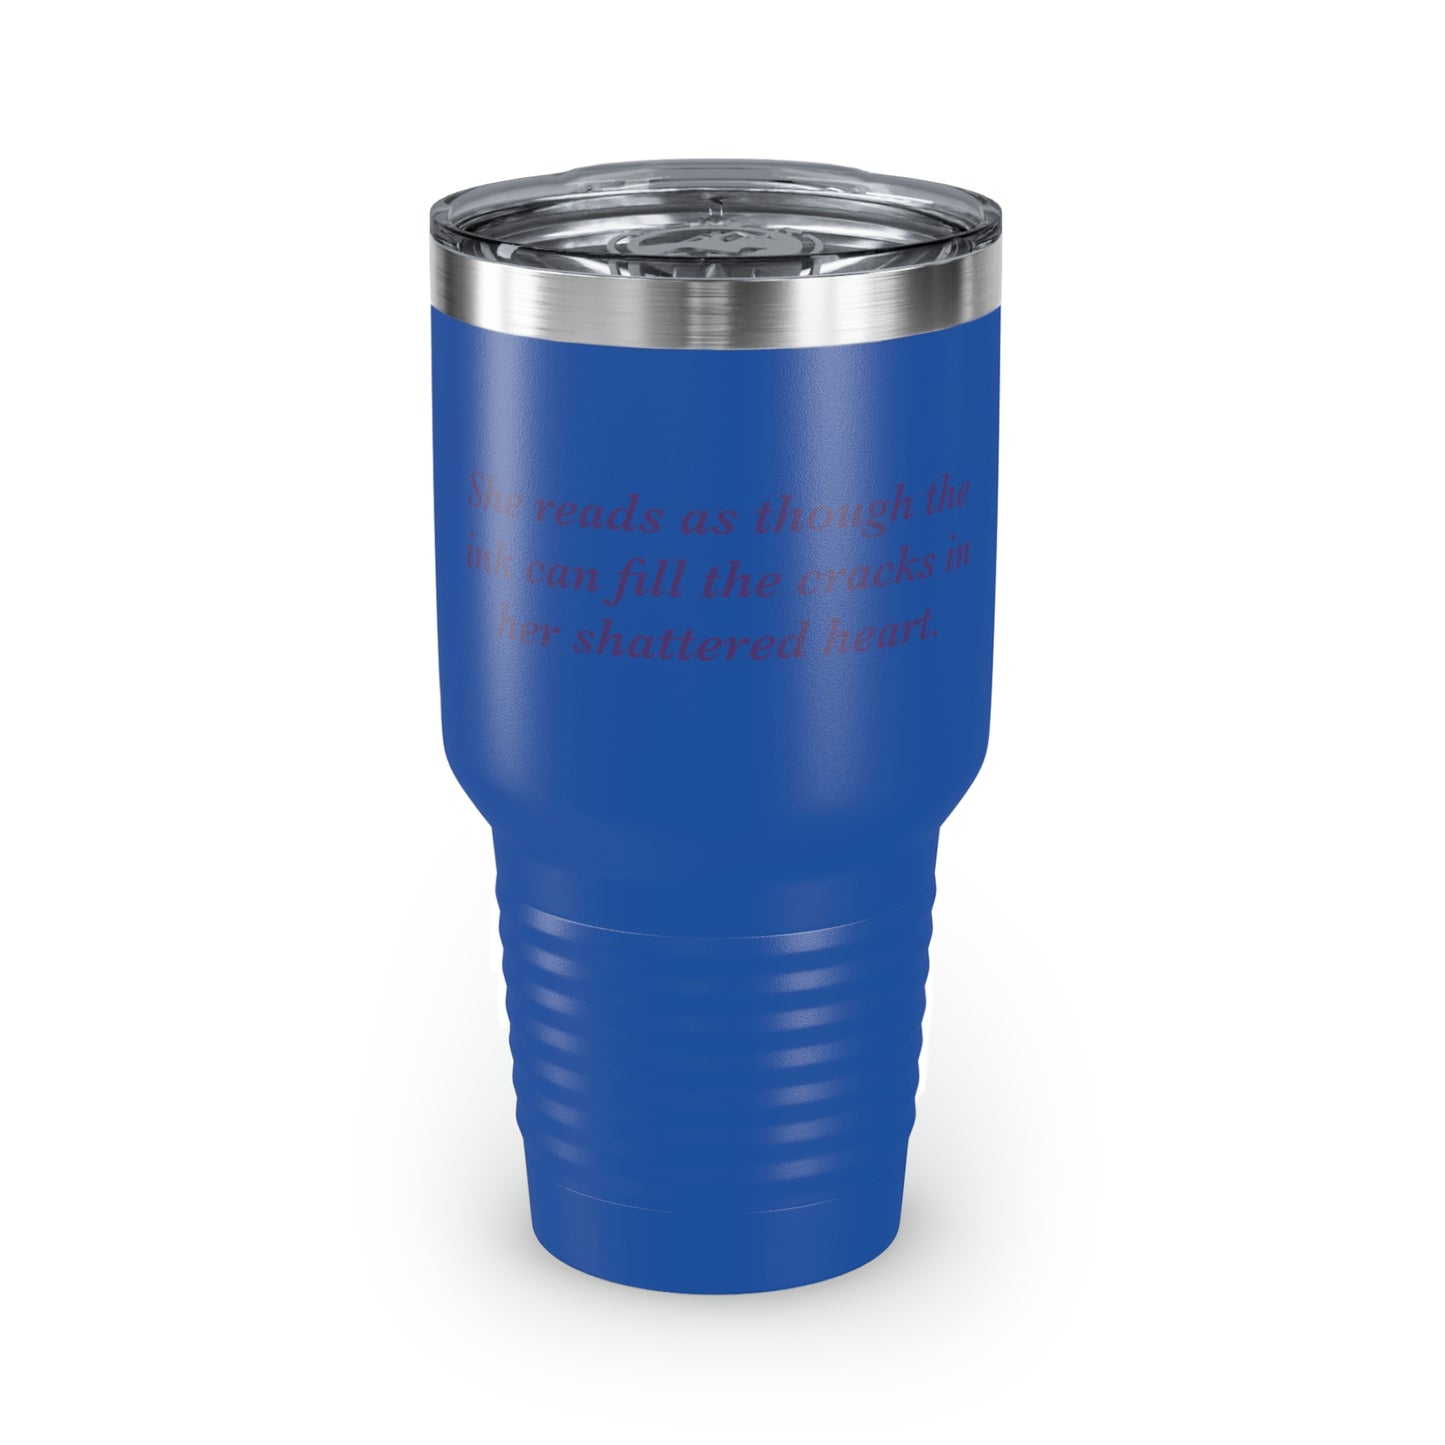 She Reads To Fill Her Shattered Heart Ringneck Tumbler, 30oz